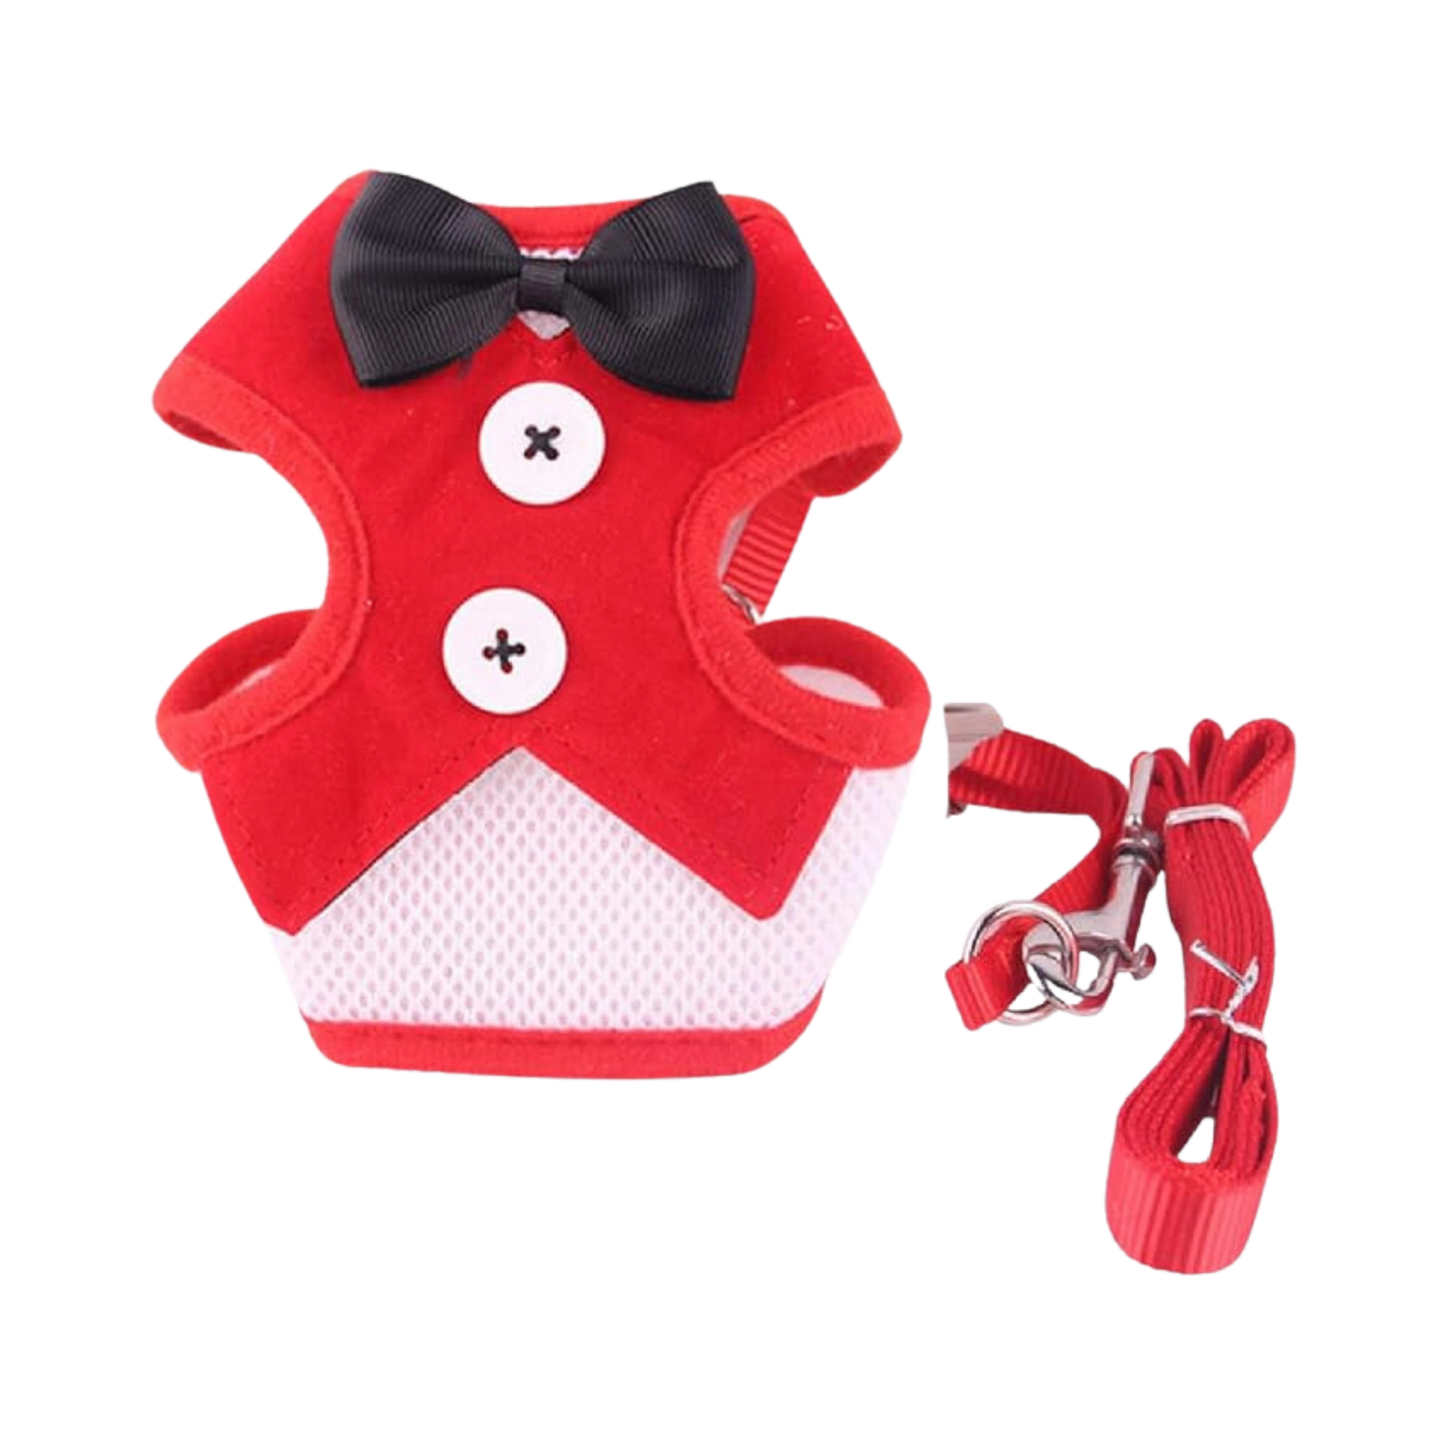 WW TOYBREED TUXIDO HARNESS WITH LEASH RED (S) SMALL